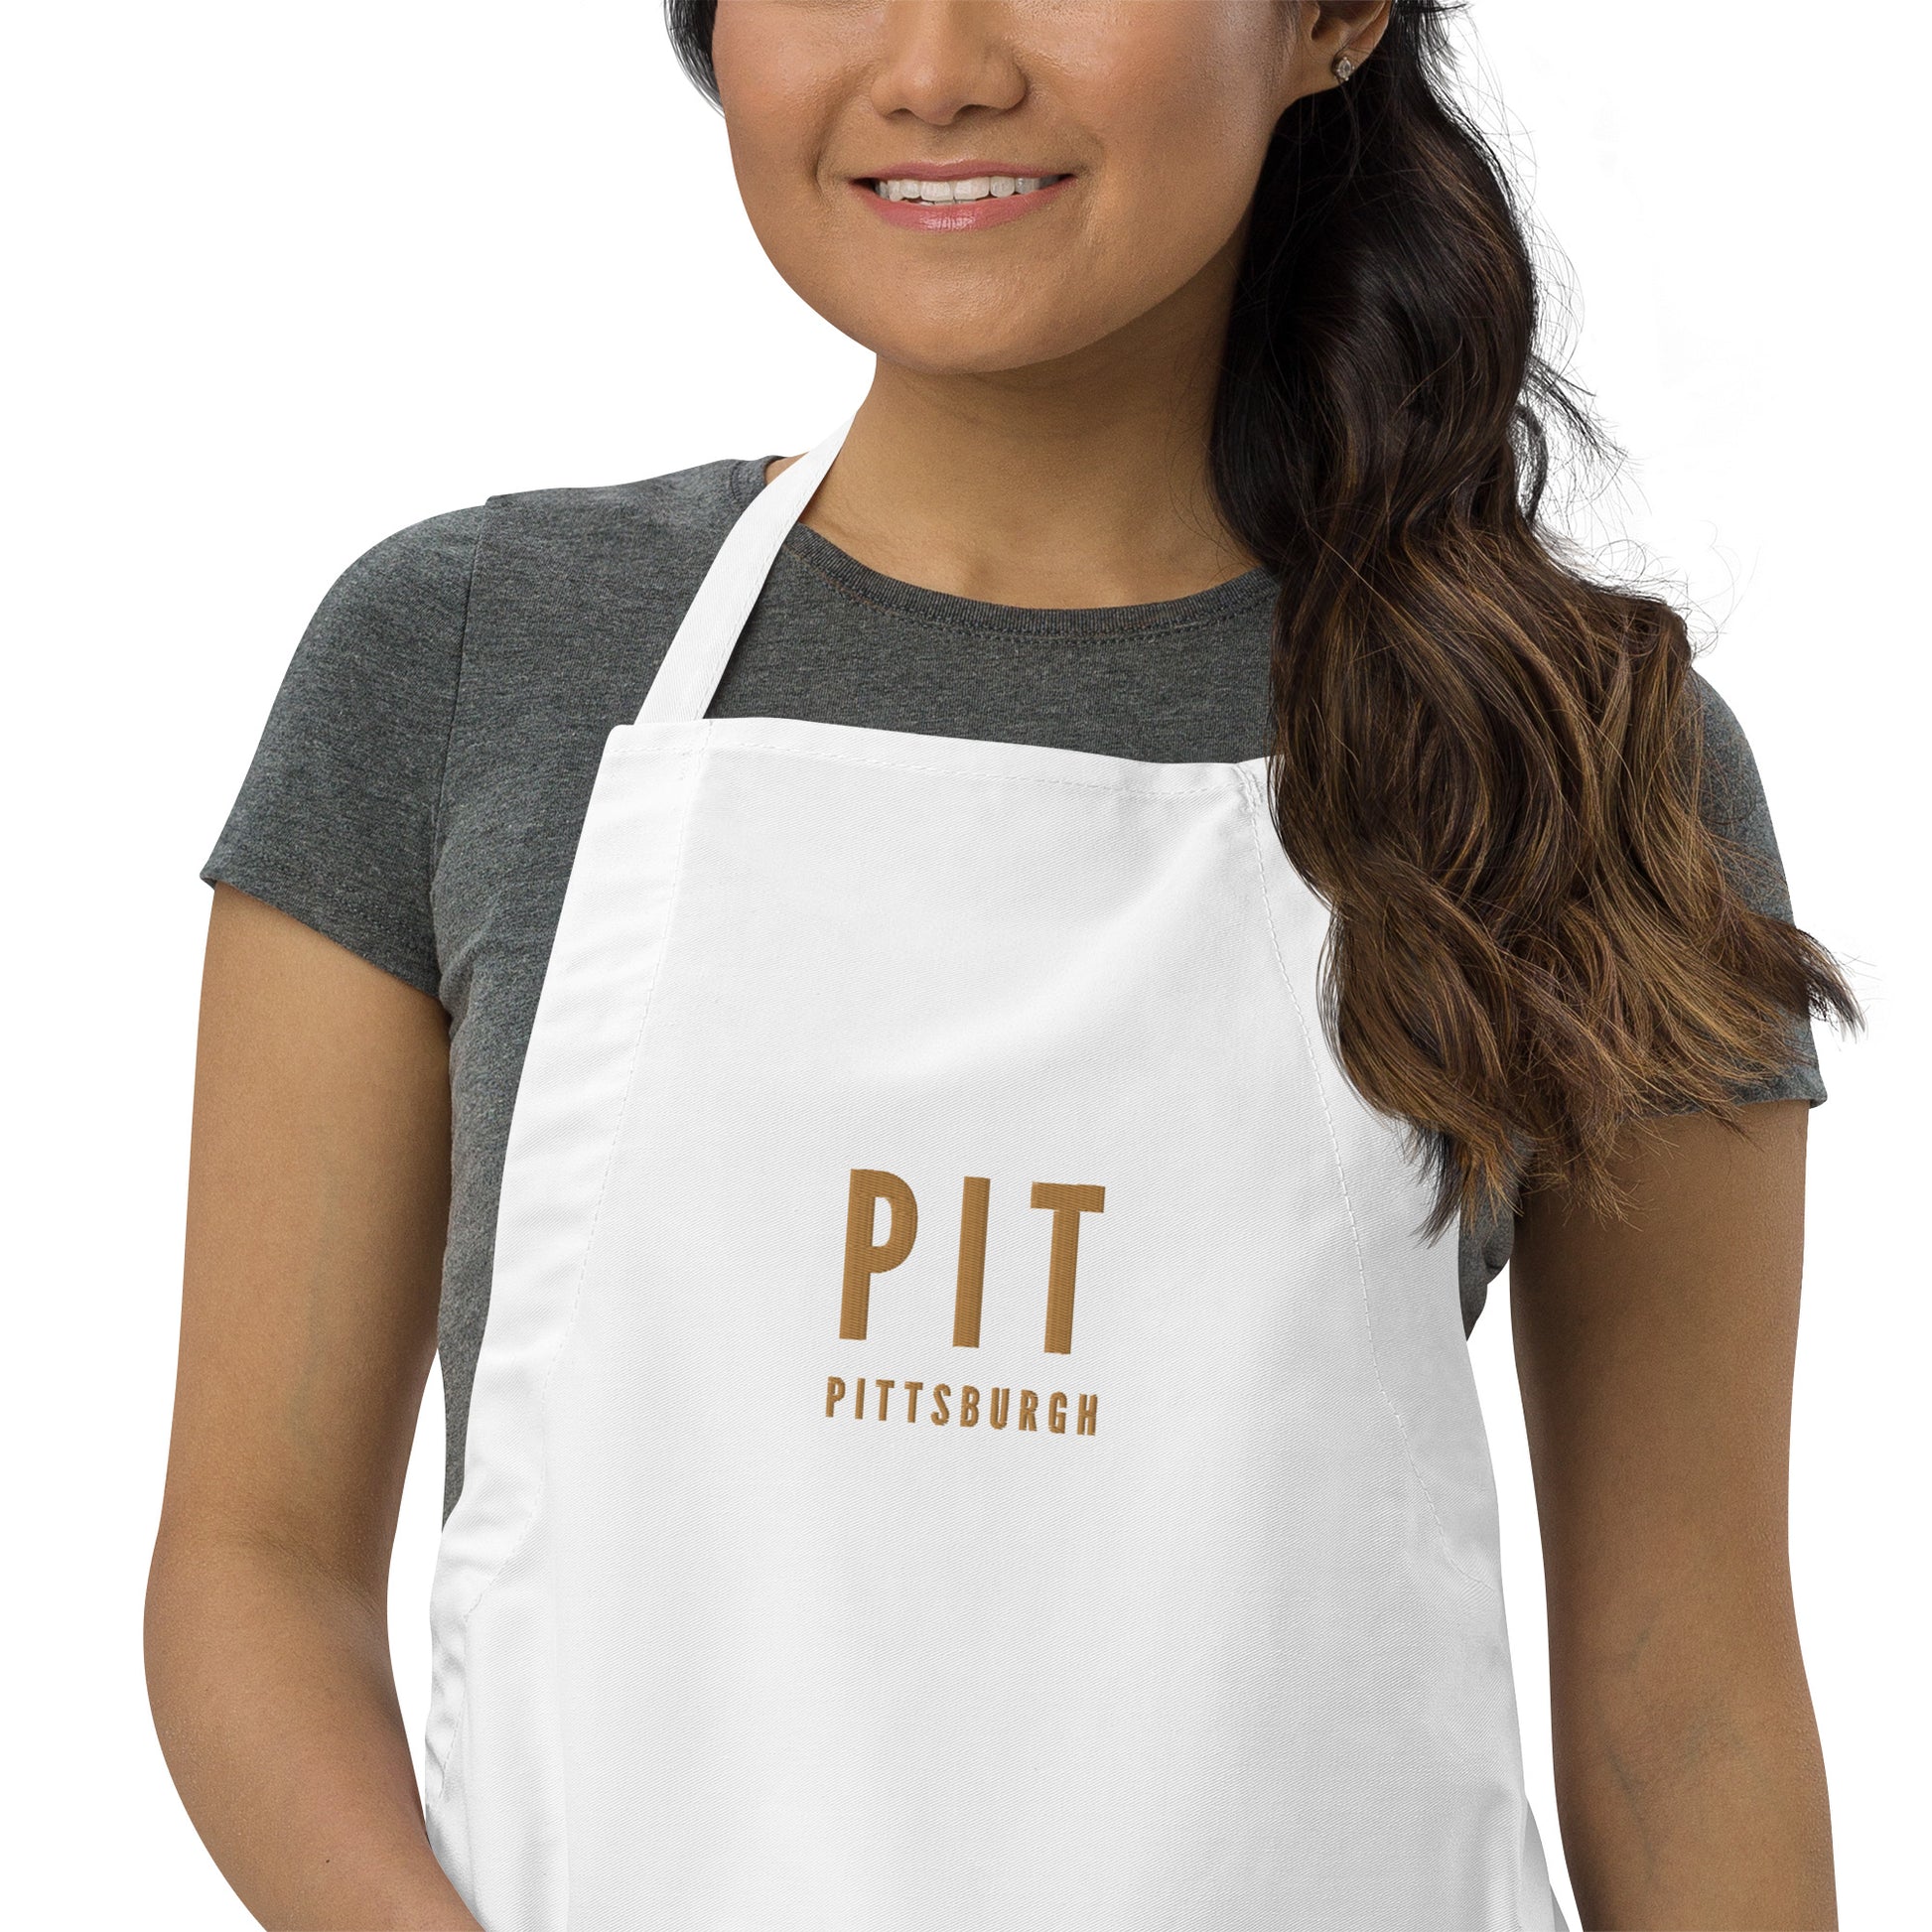 City Embroidered Apron - Old Gold • PIT Pittsburgh • YHM Designs - Image 08